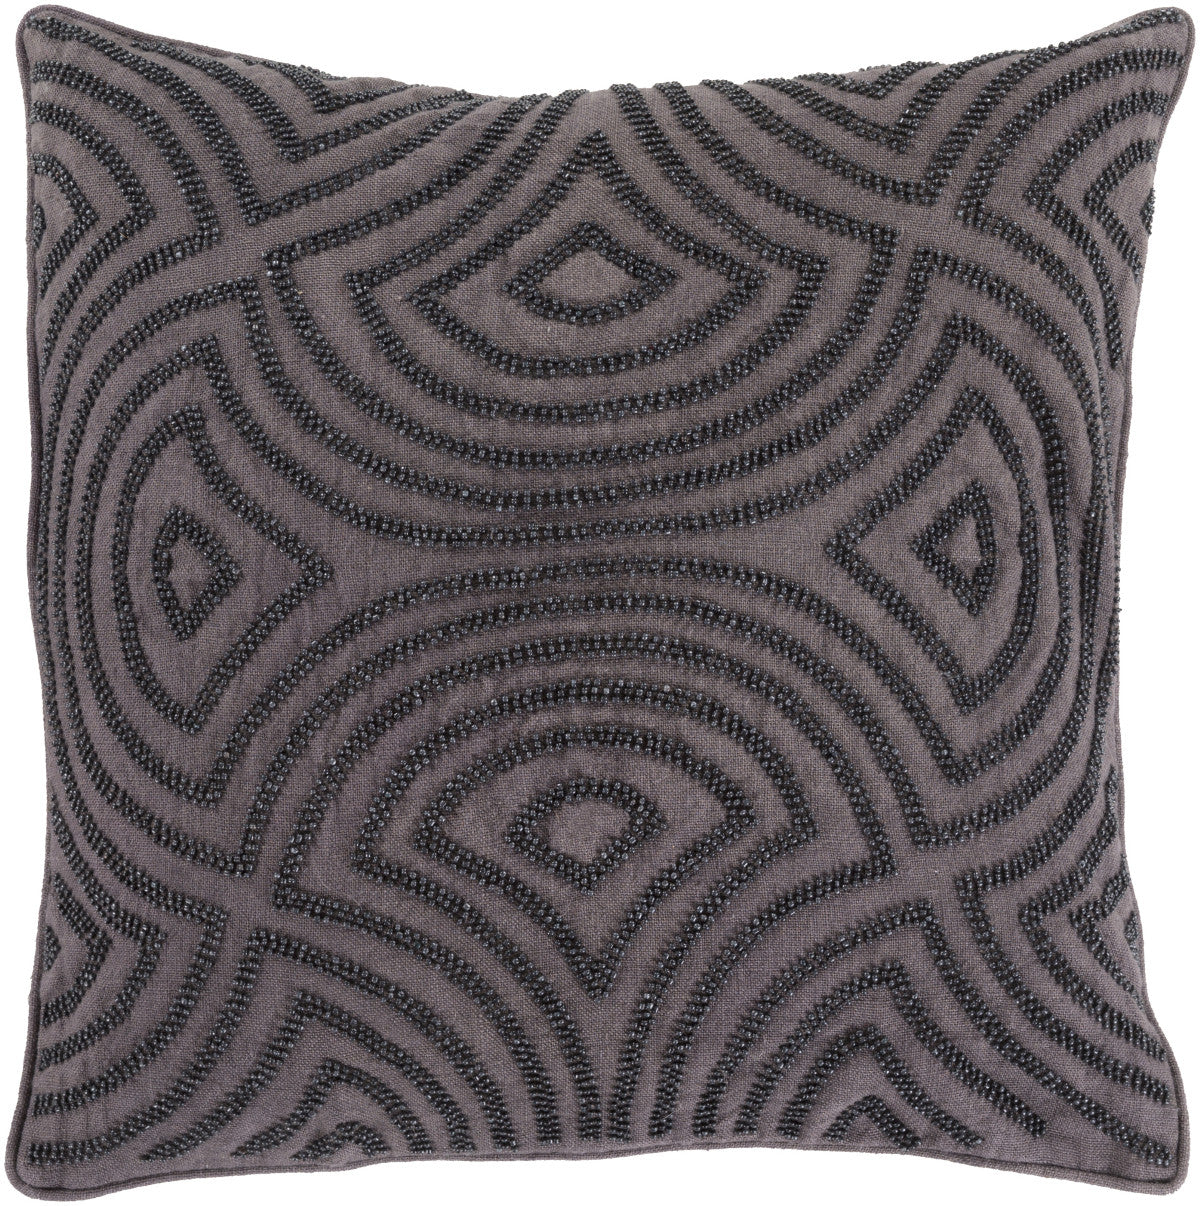 Surya Skinny Dip Linen and Beads SKD-005 Pillow by Candice Olson